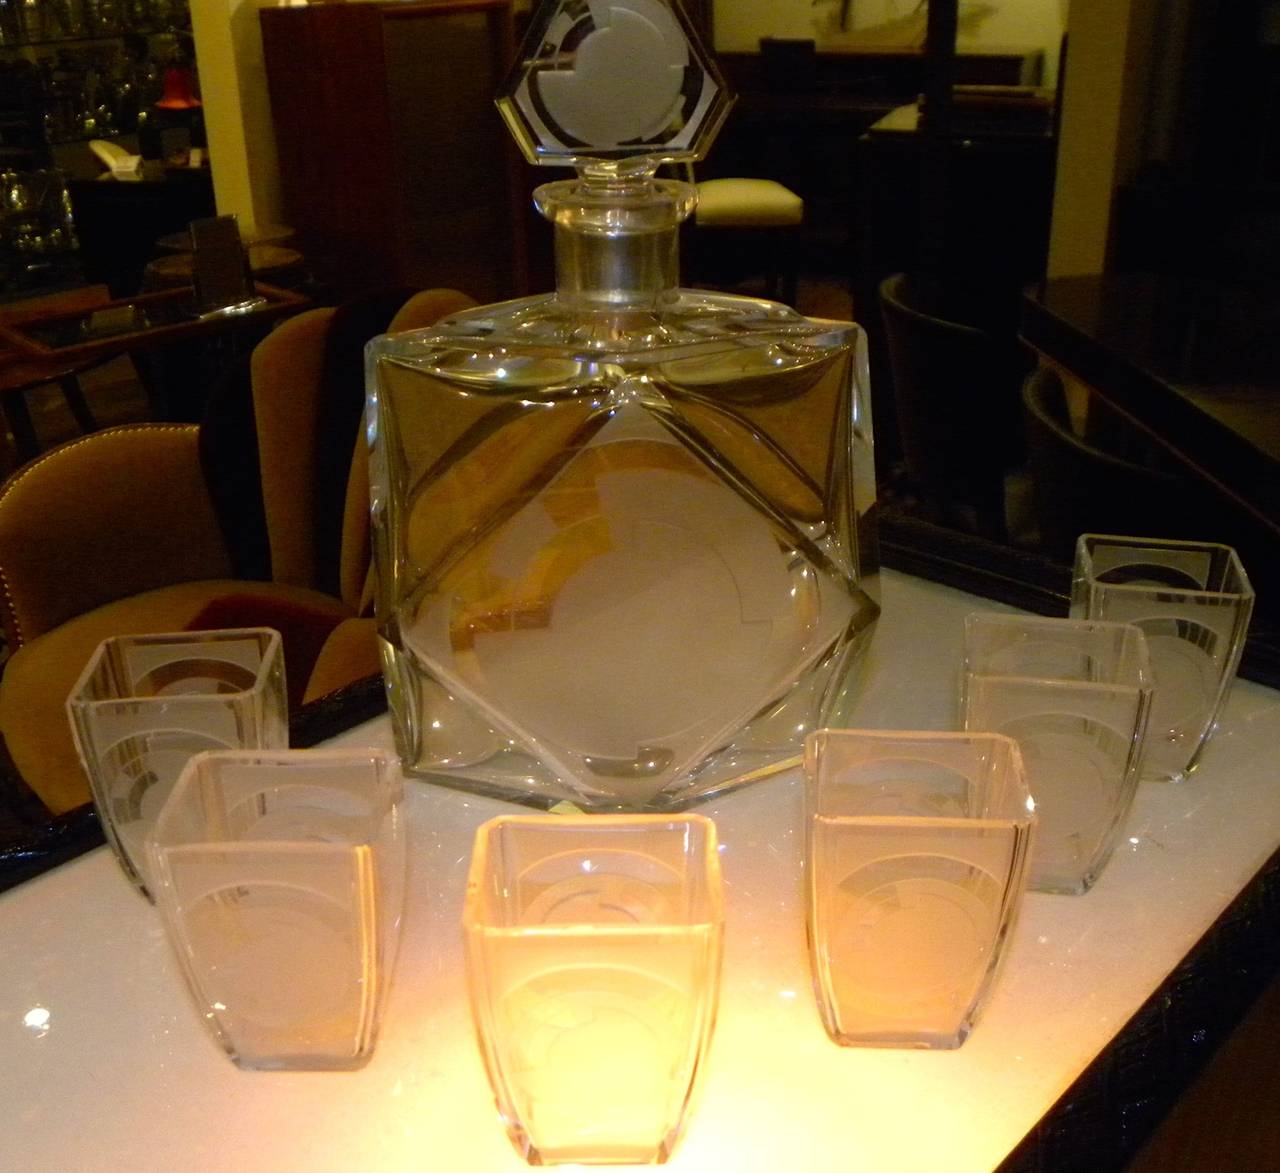 A most unusual Art Deco decanter and six glasses by Baccarat in perfect condition and ready for toasting! The drinking cups have a nice feel, size and weight. The frosted and etched design is geometric and stylish. The faceted sides of the decanter